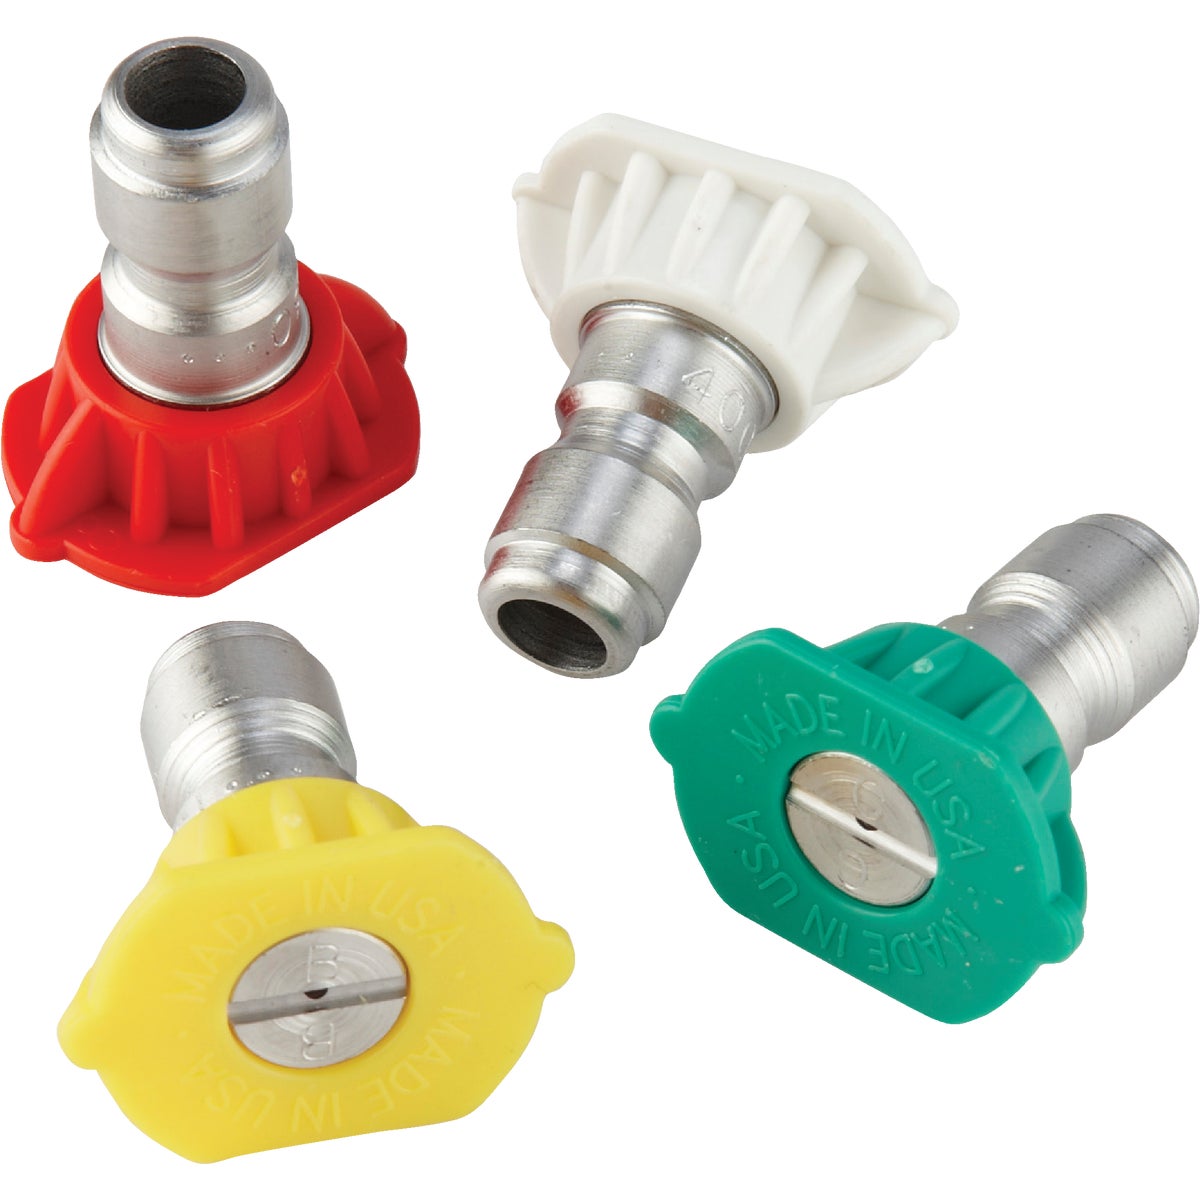 Item 788557, Quick Connect spray nozzles are color coded per spray angle.